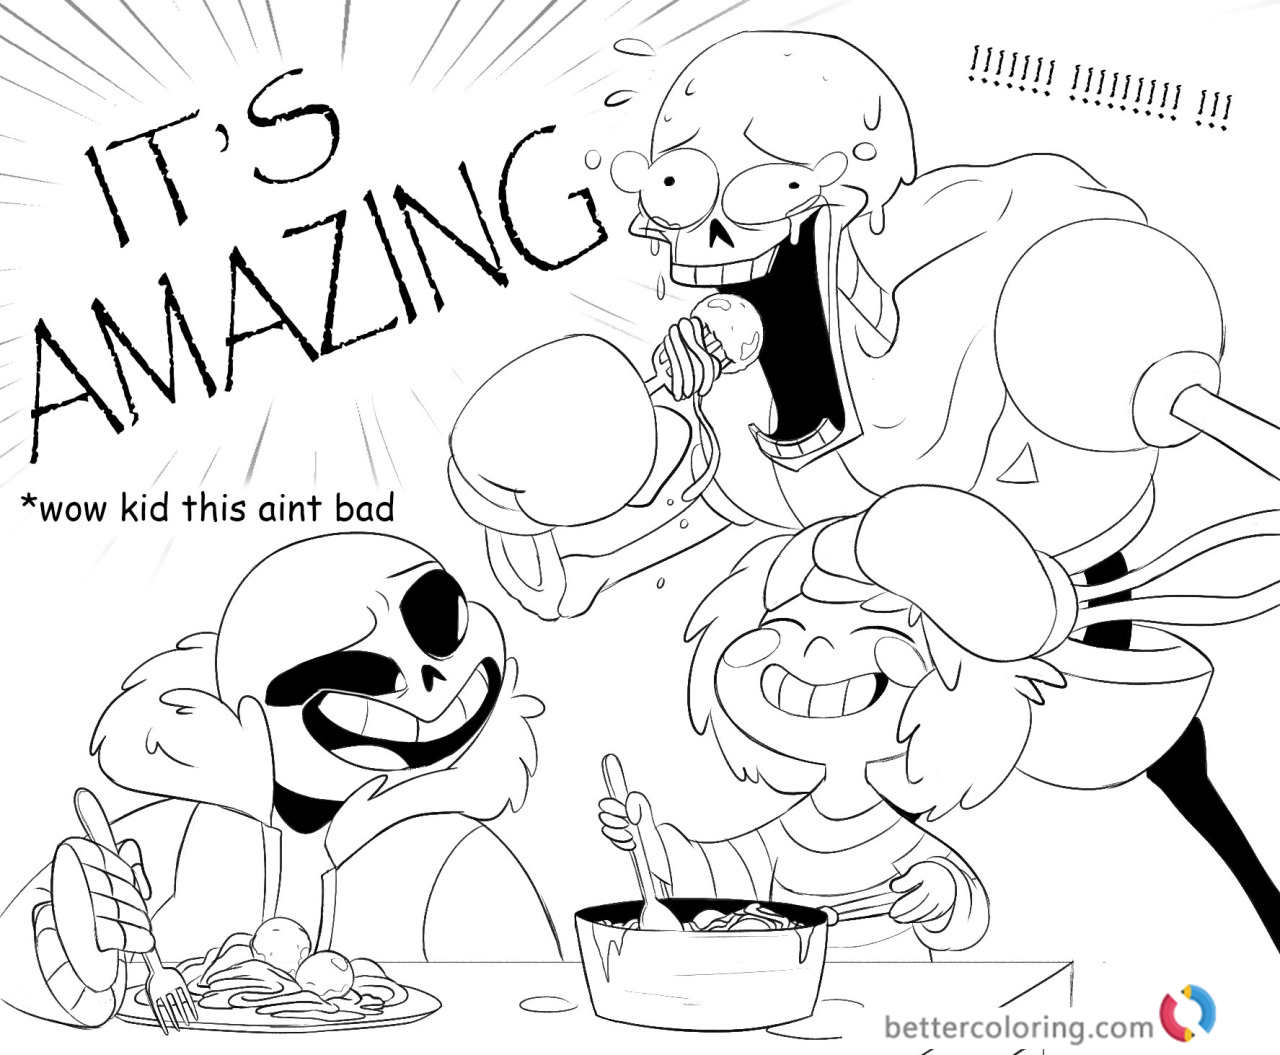 Undertale coloring pages wow kid printable